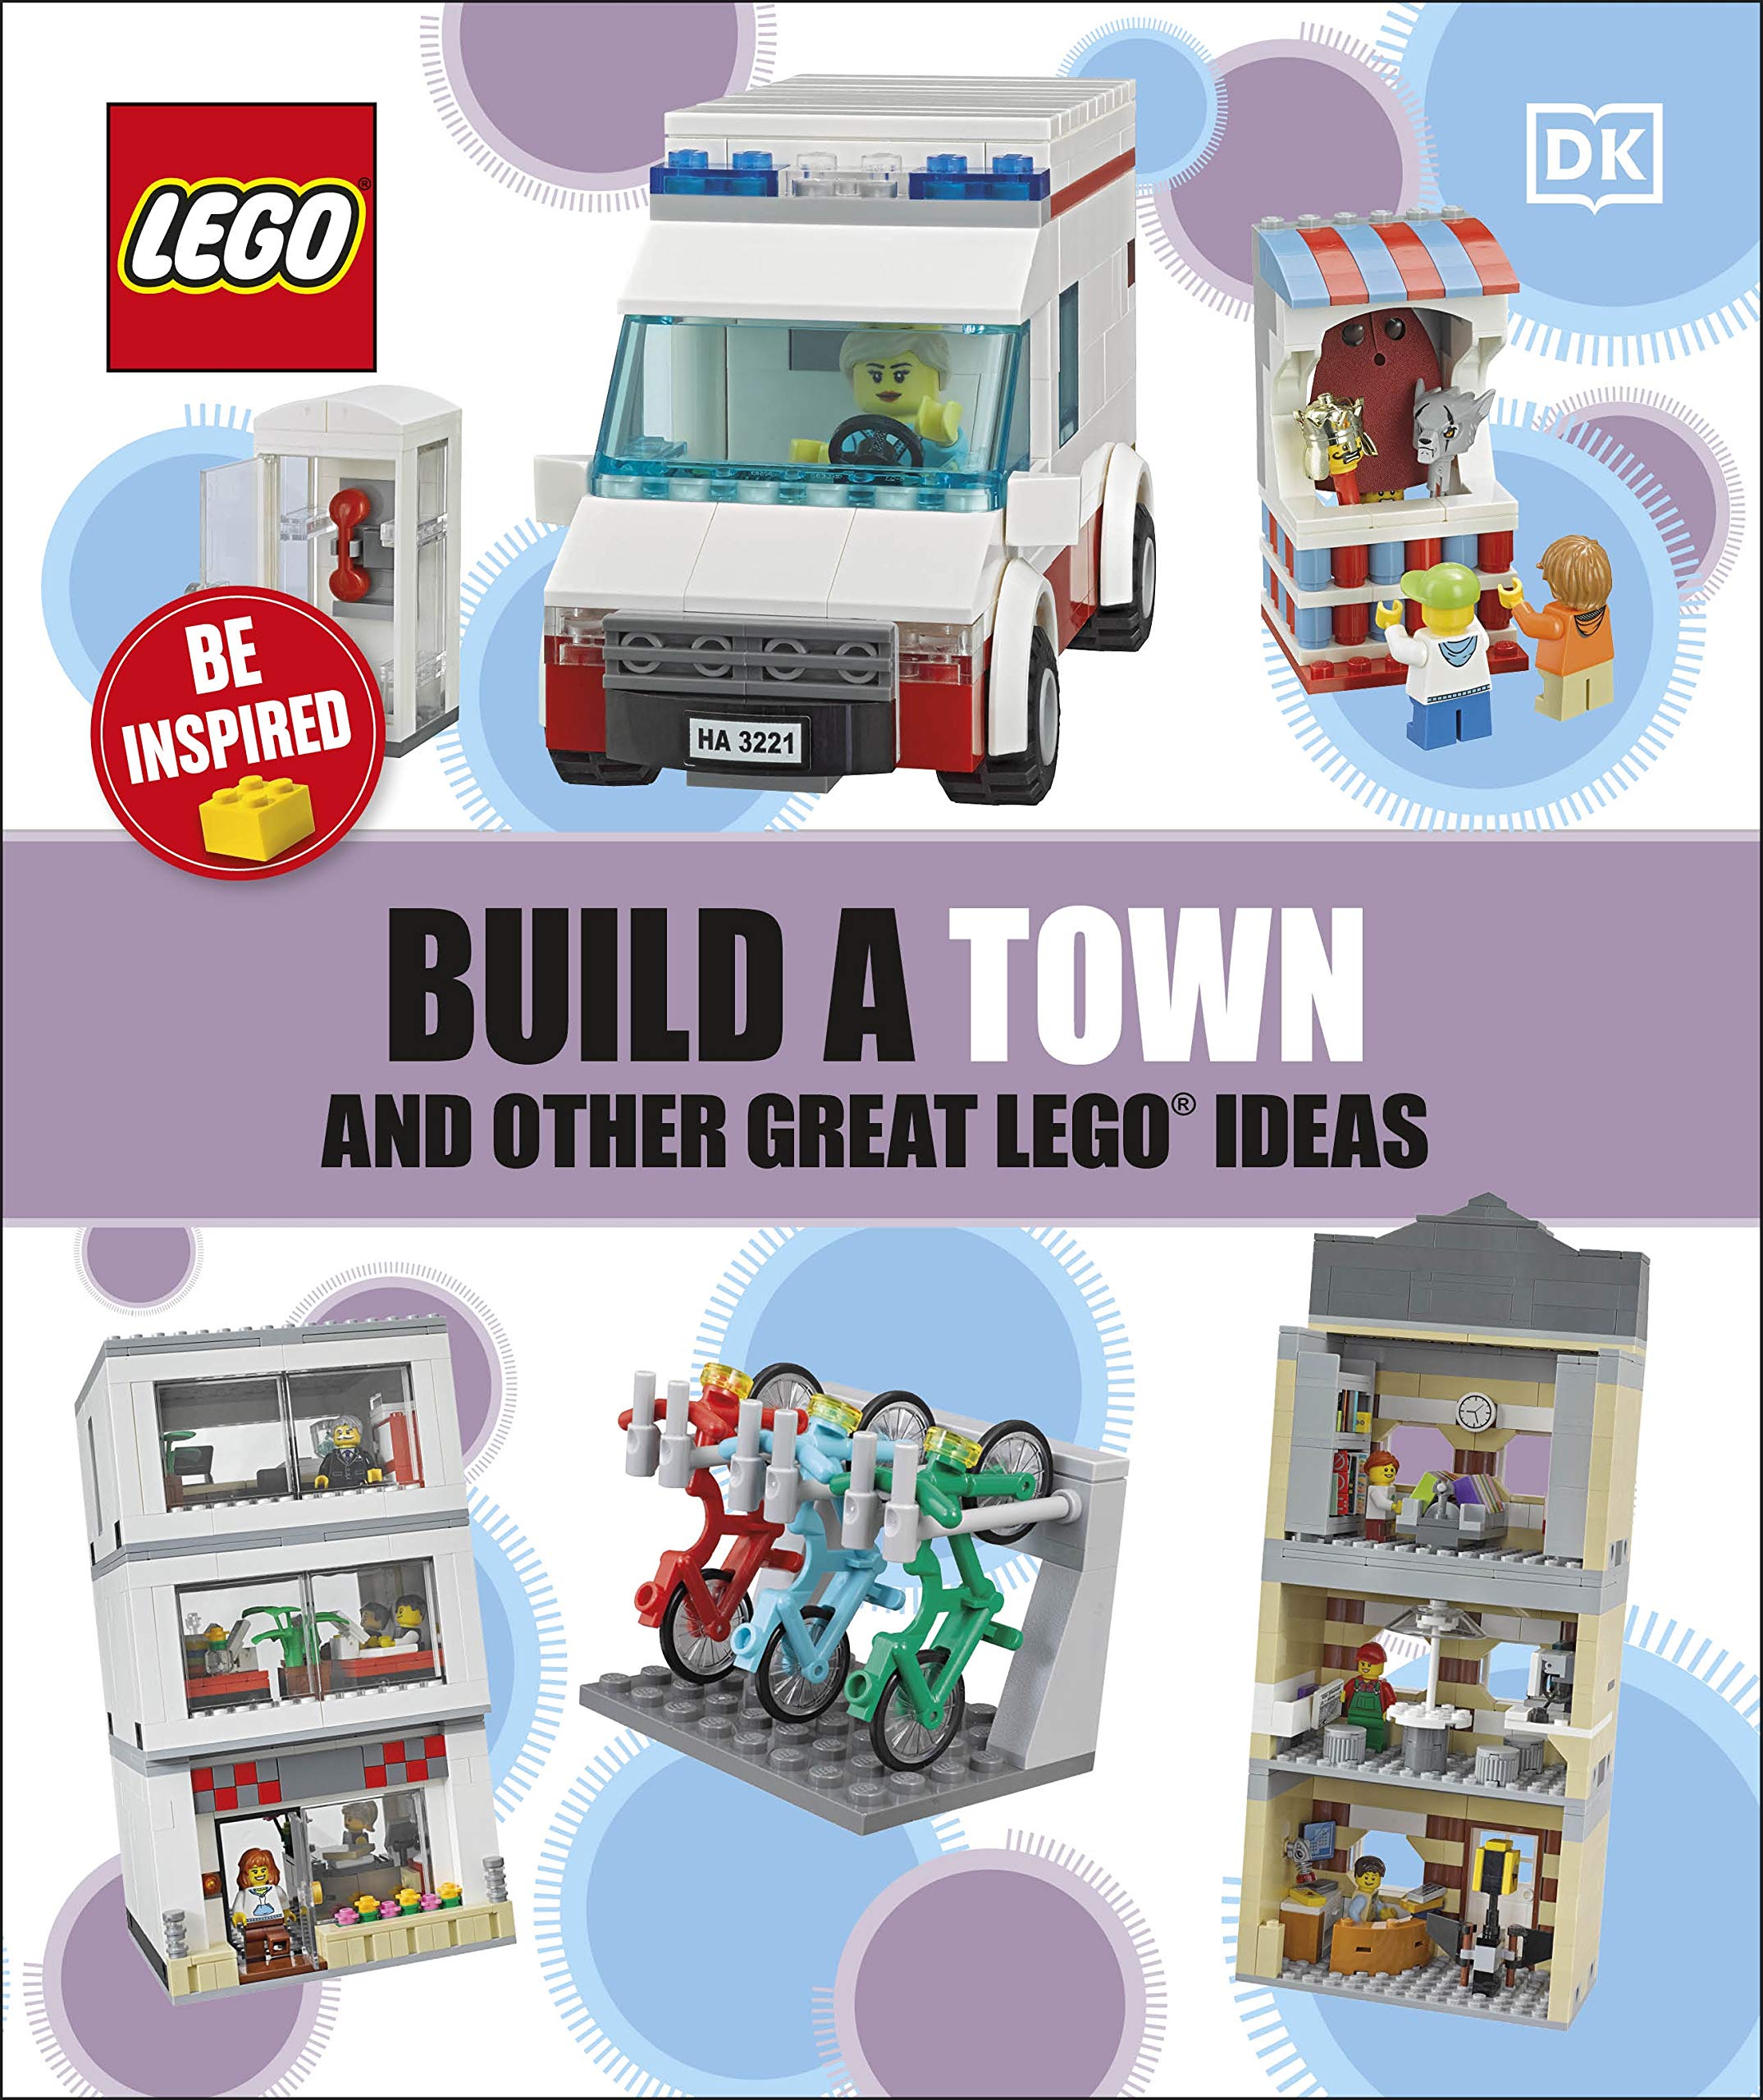 Build A Town And Other Great LEGO Ideas